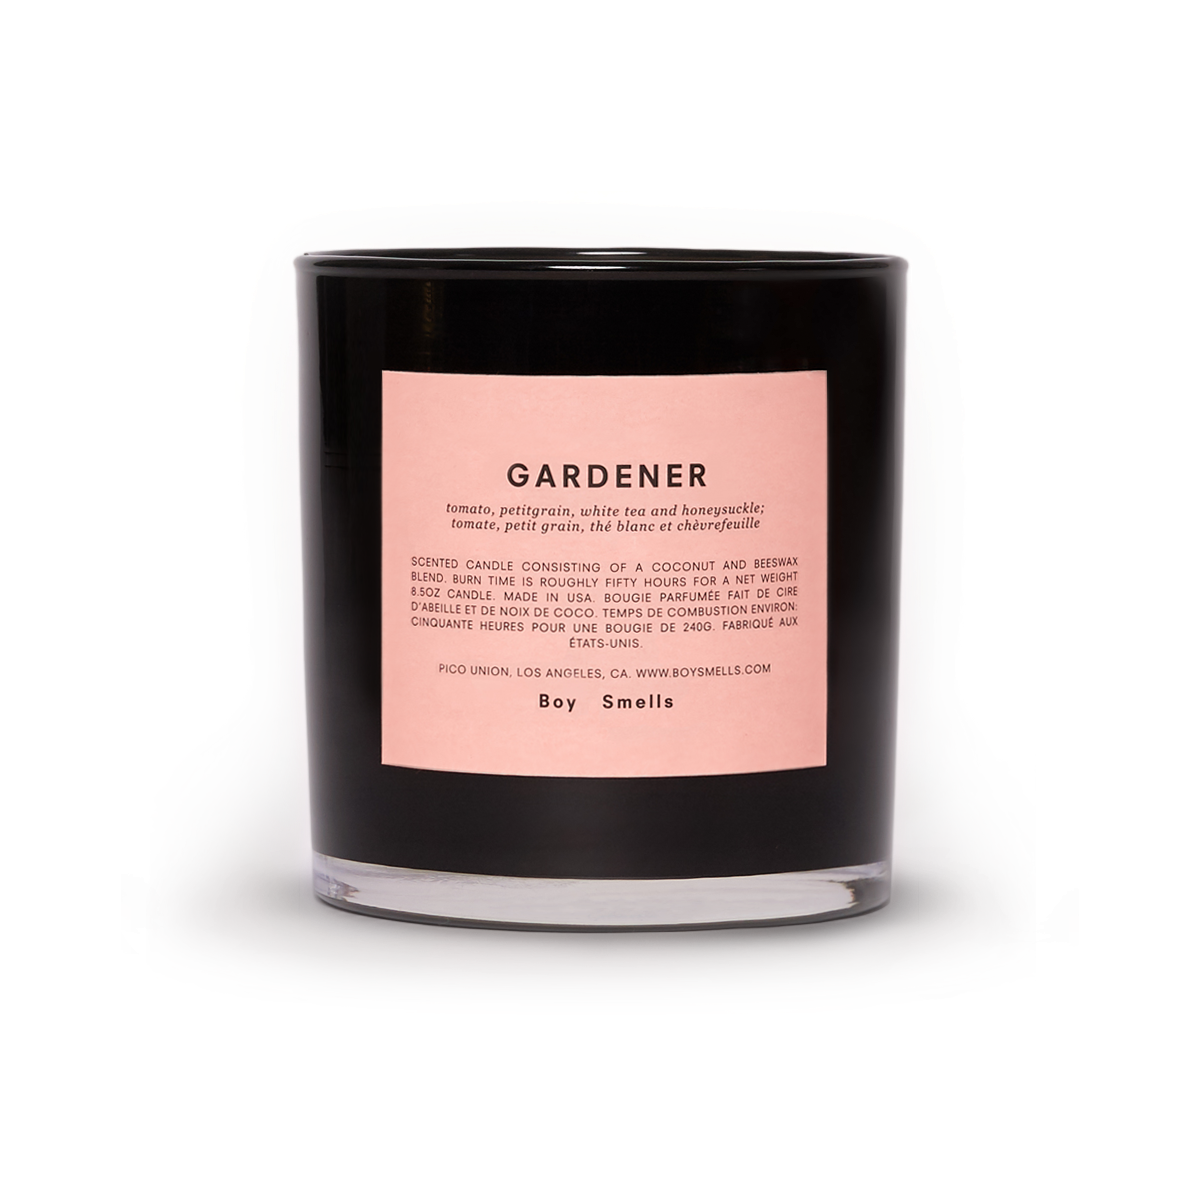 Gardener Scented Candle